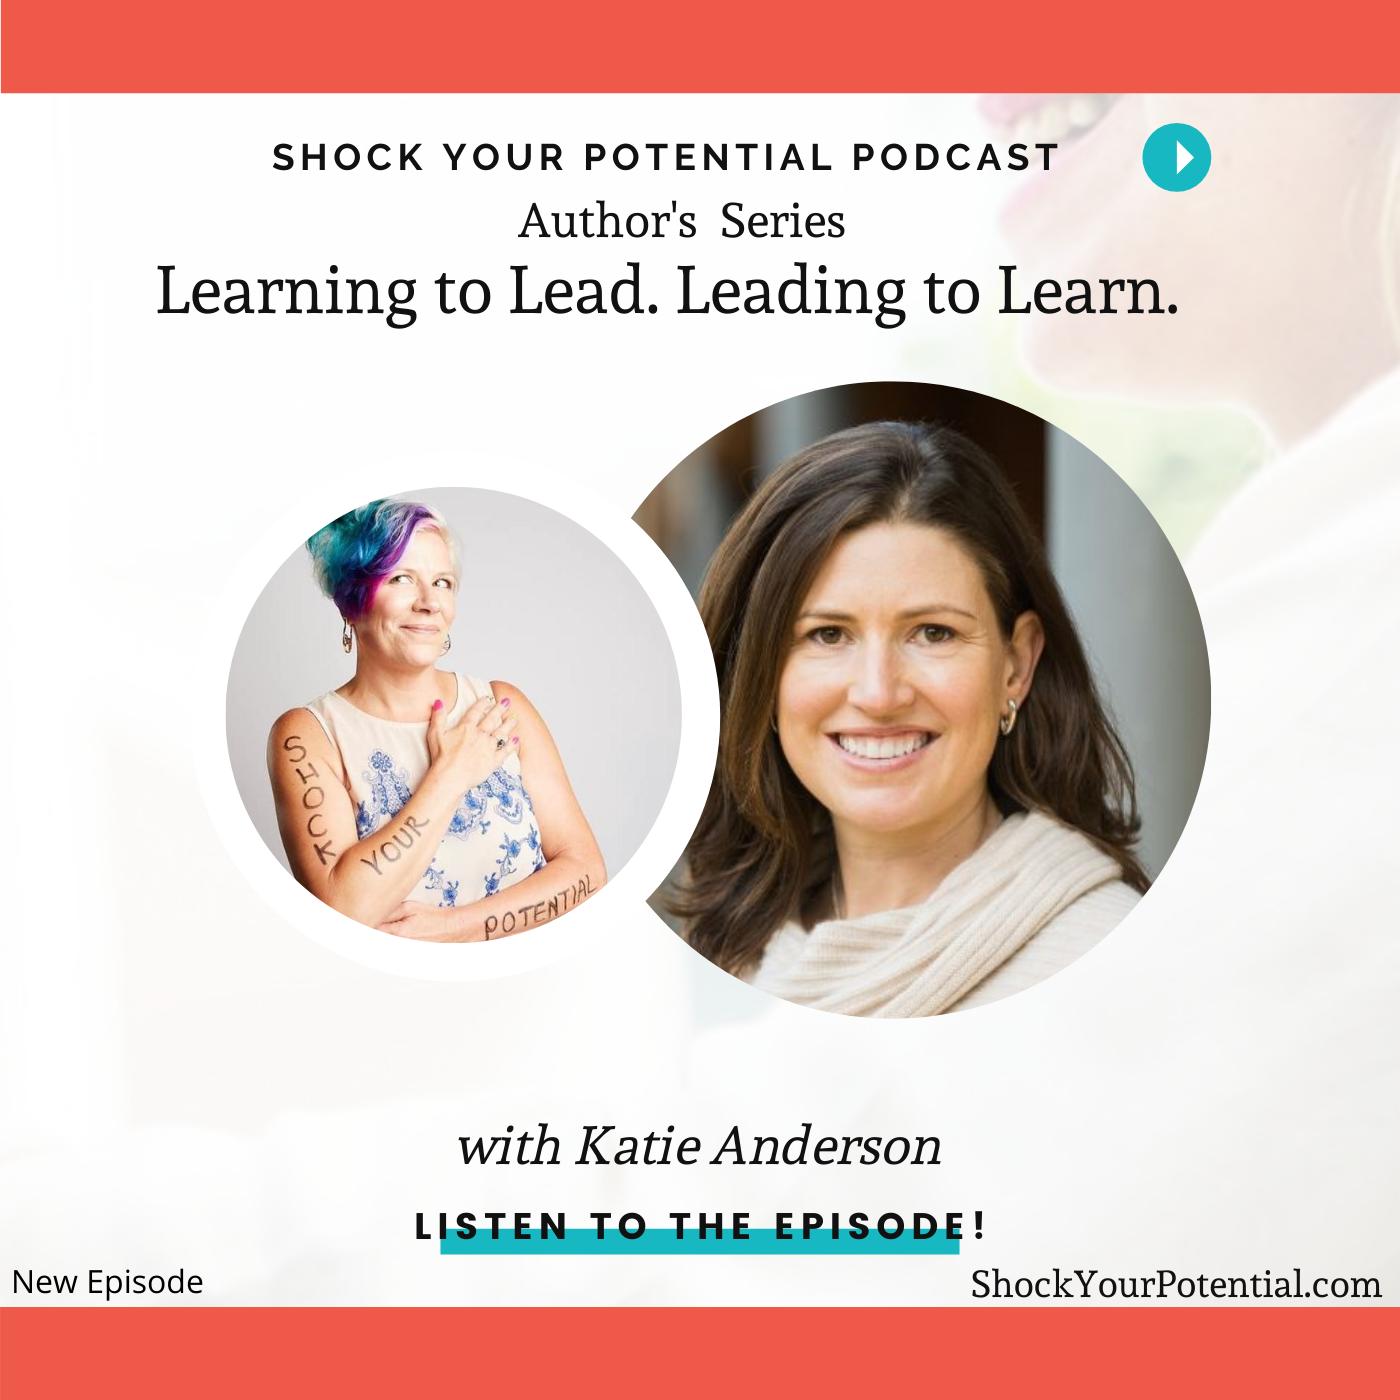 Learning to LEAD, Leading to LEARN – Katie Anderson